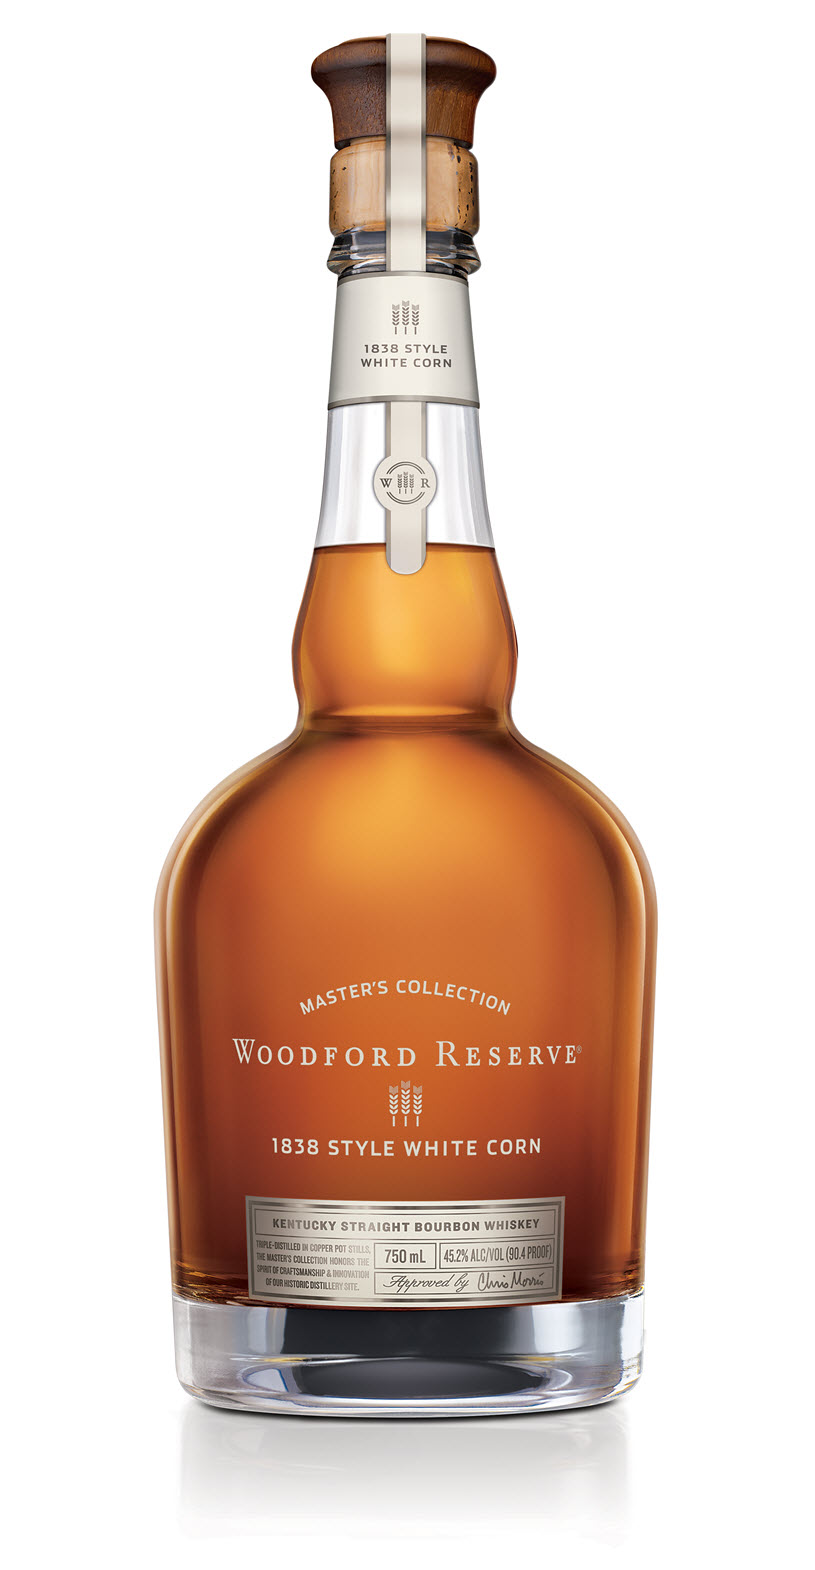 Woodford Reserve Masters Collection 1838 Style White Corn Bourbon Whiskey